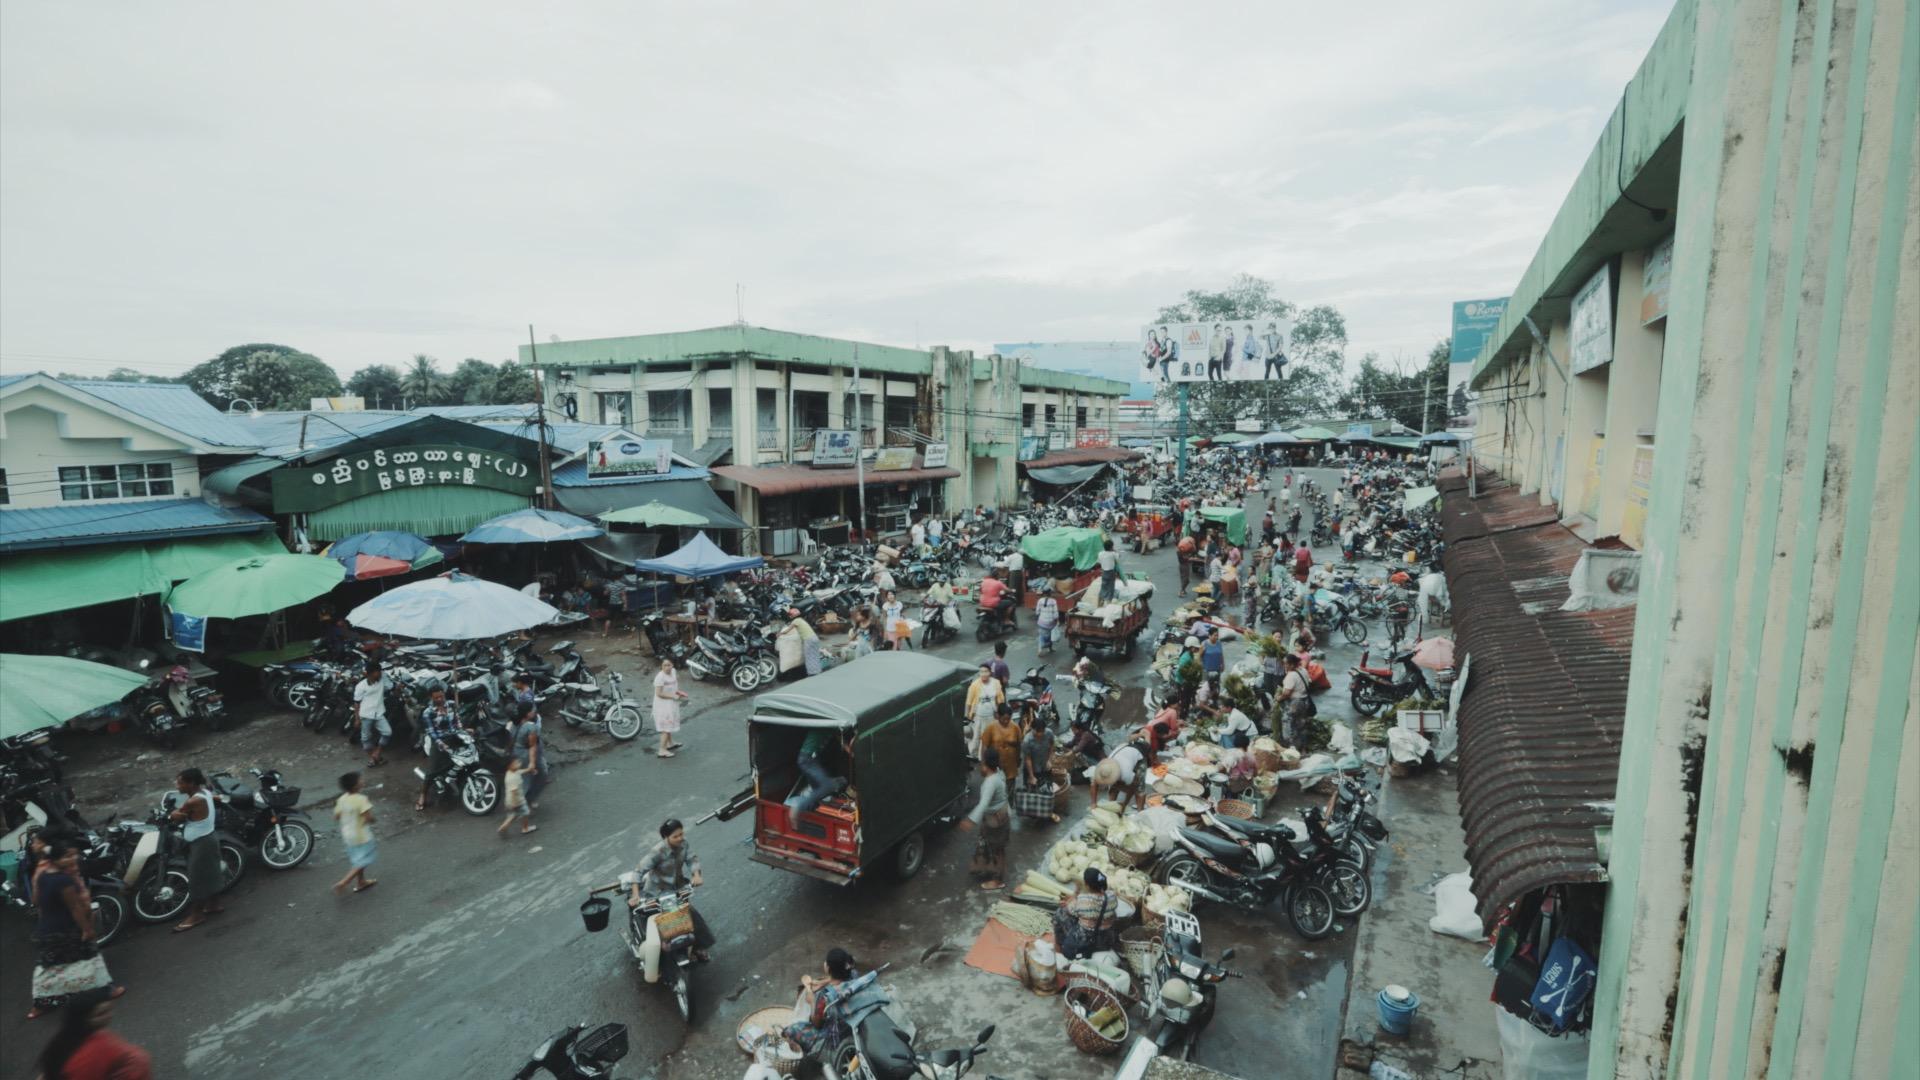 A bustling market in Myitkyina, Myanmar, the last outpost in the country's northern frontier before the region disintegrates into a lawless zone ruled by militias. Myitkyina contains the northernmost terminal station on a rail line built during British co